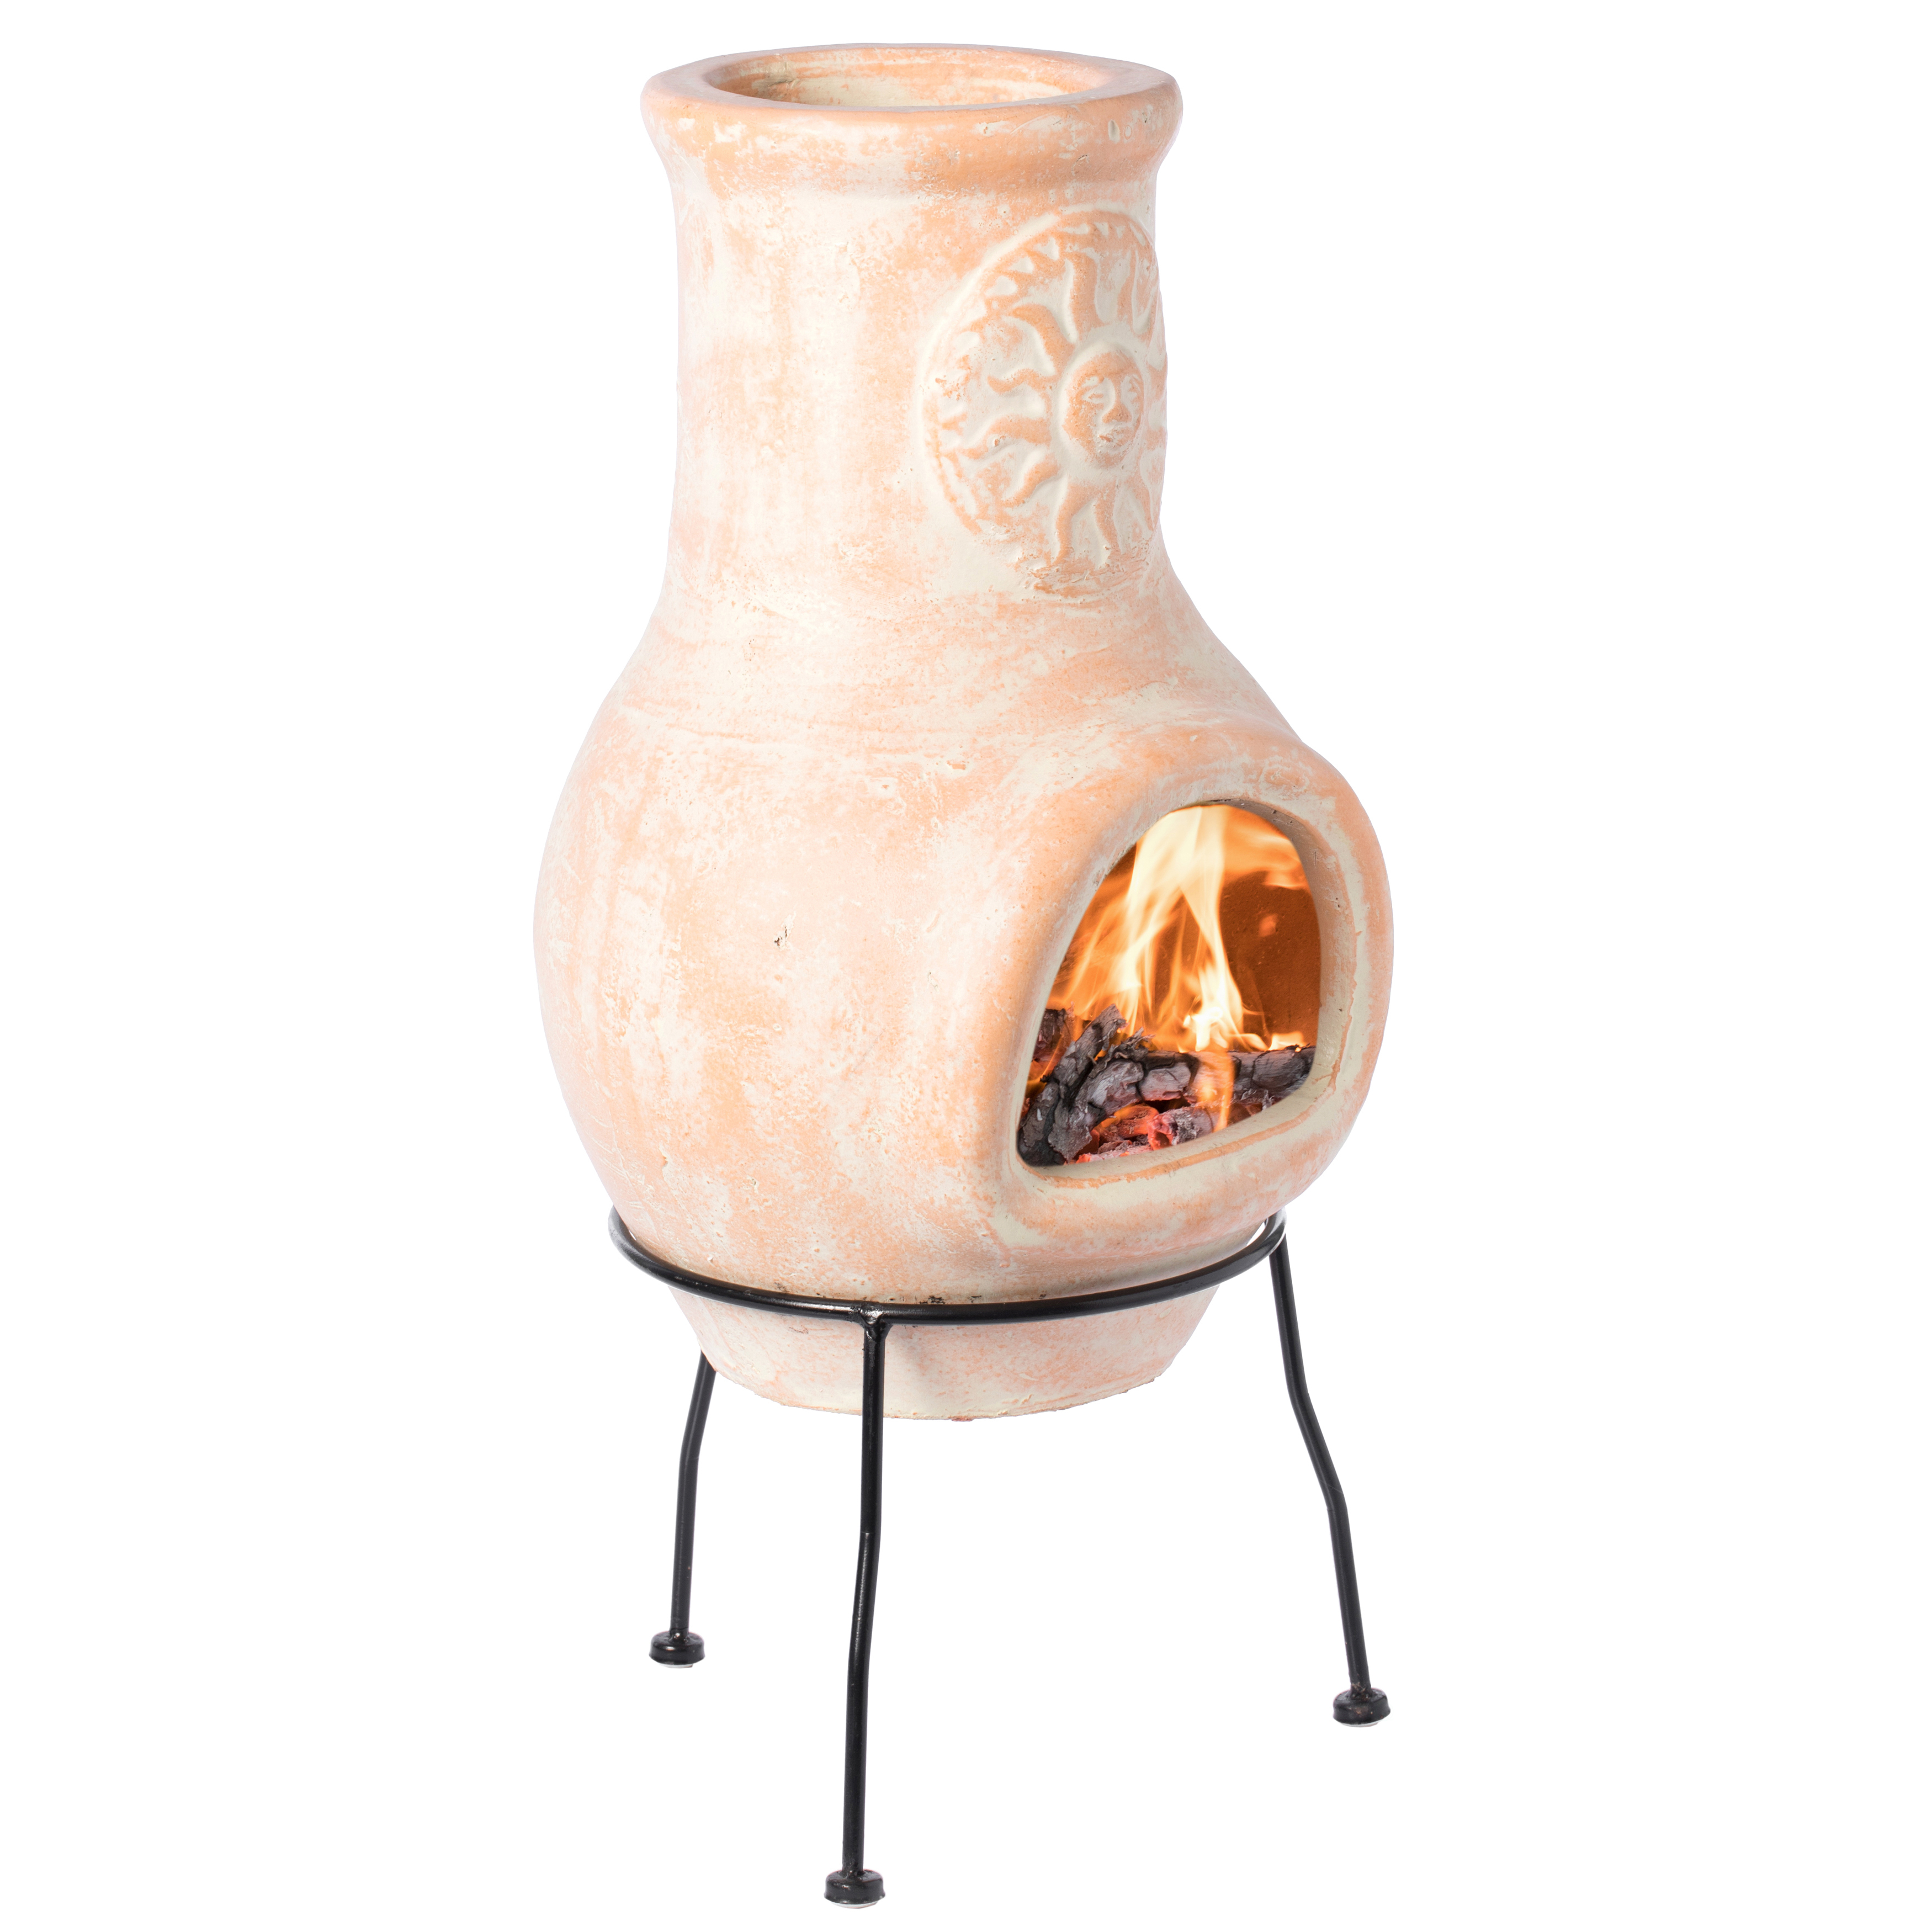 Outdoor Beige Clay Chiminea Outdoor Fireplace Sun Design Charcoal Burning Fire Pit With Sturdy Metal Stand, Barbecue, Cocktail Party